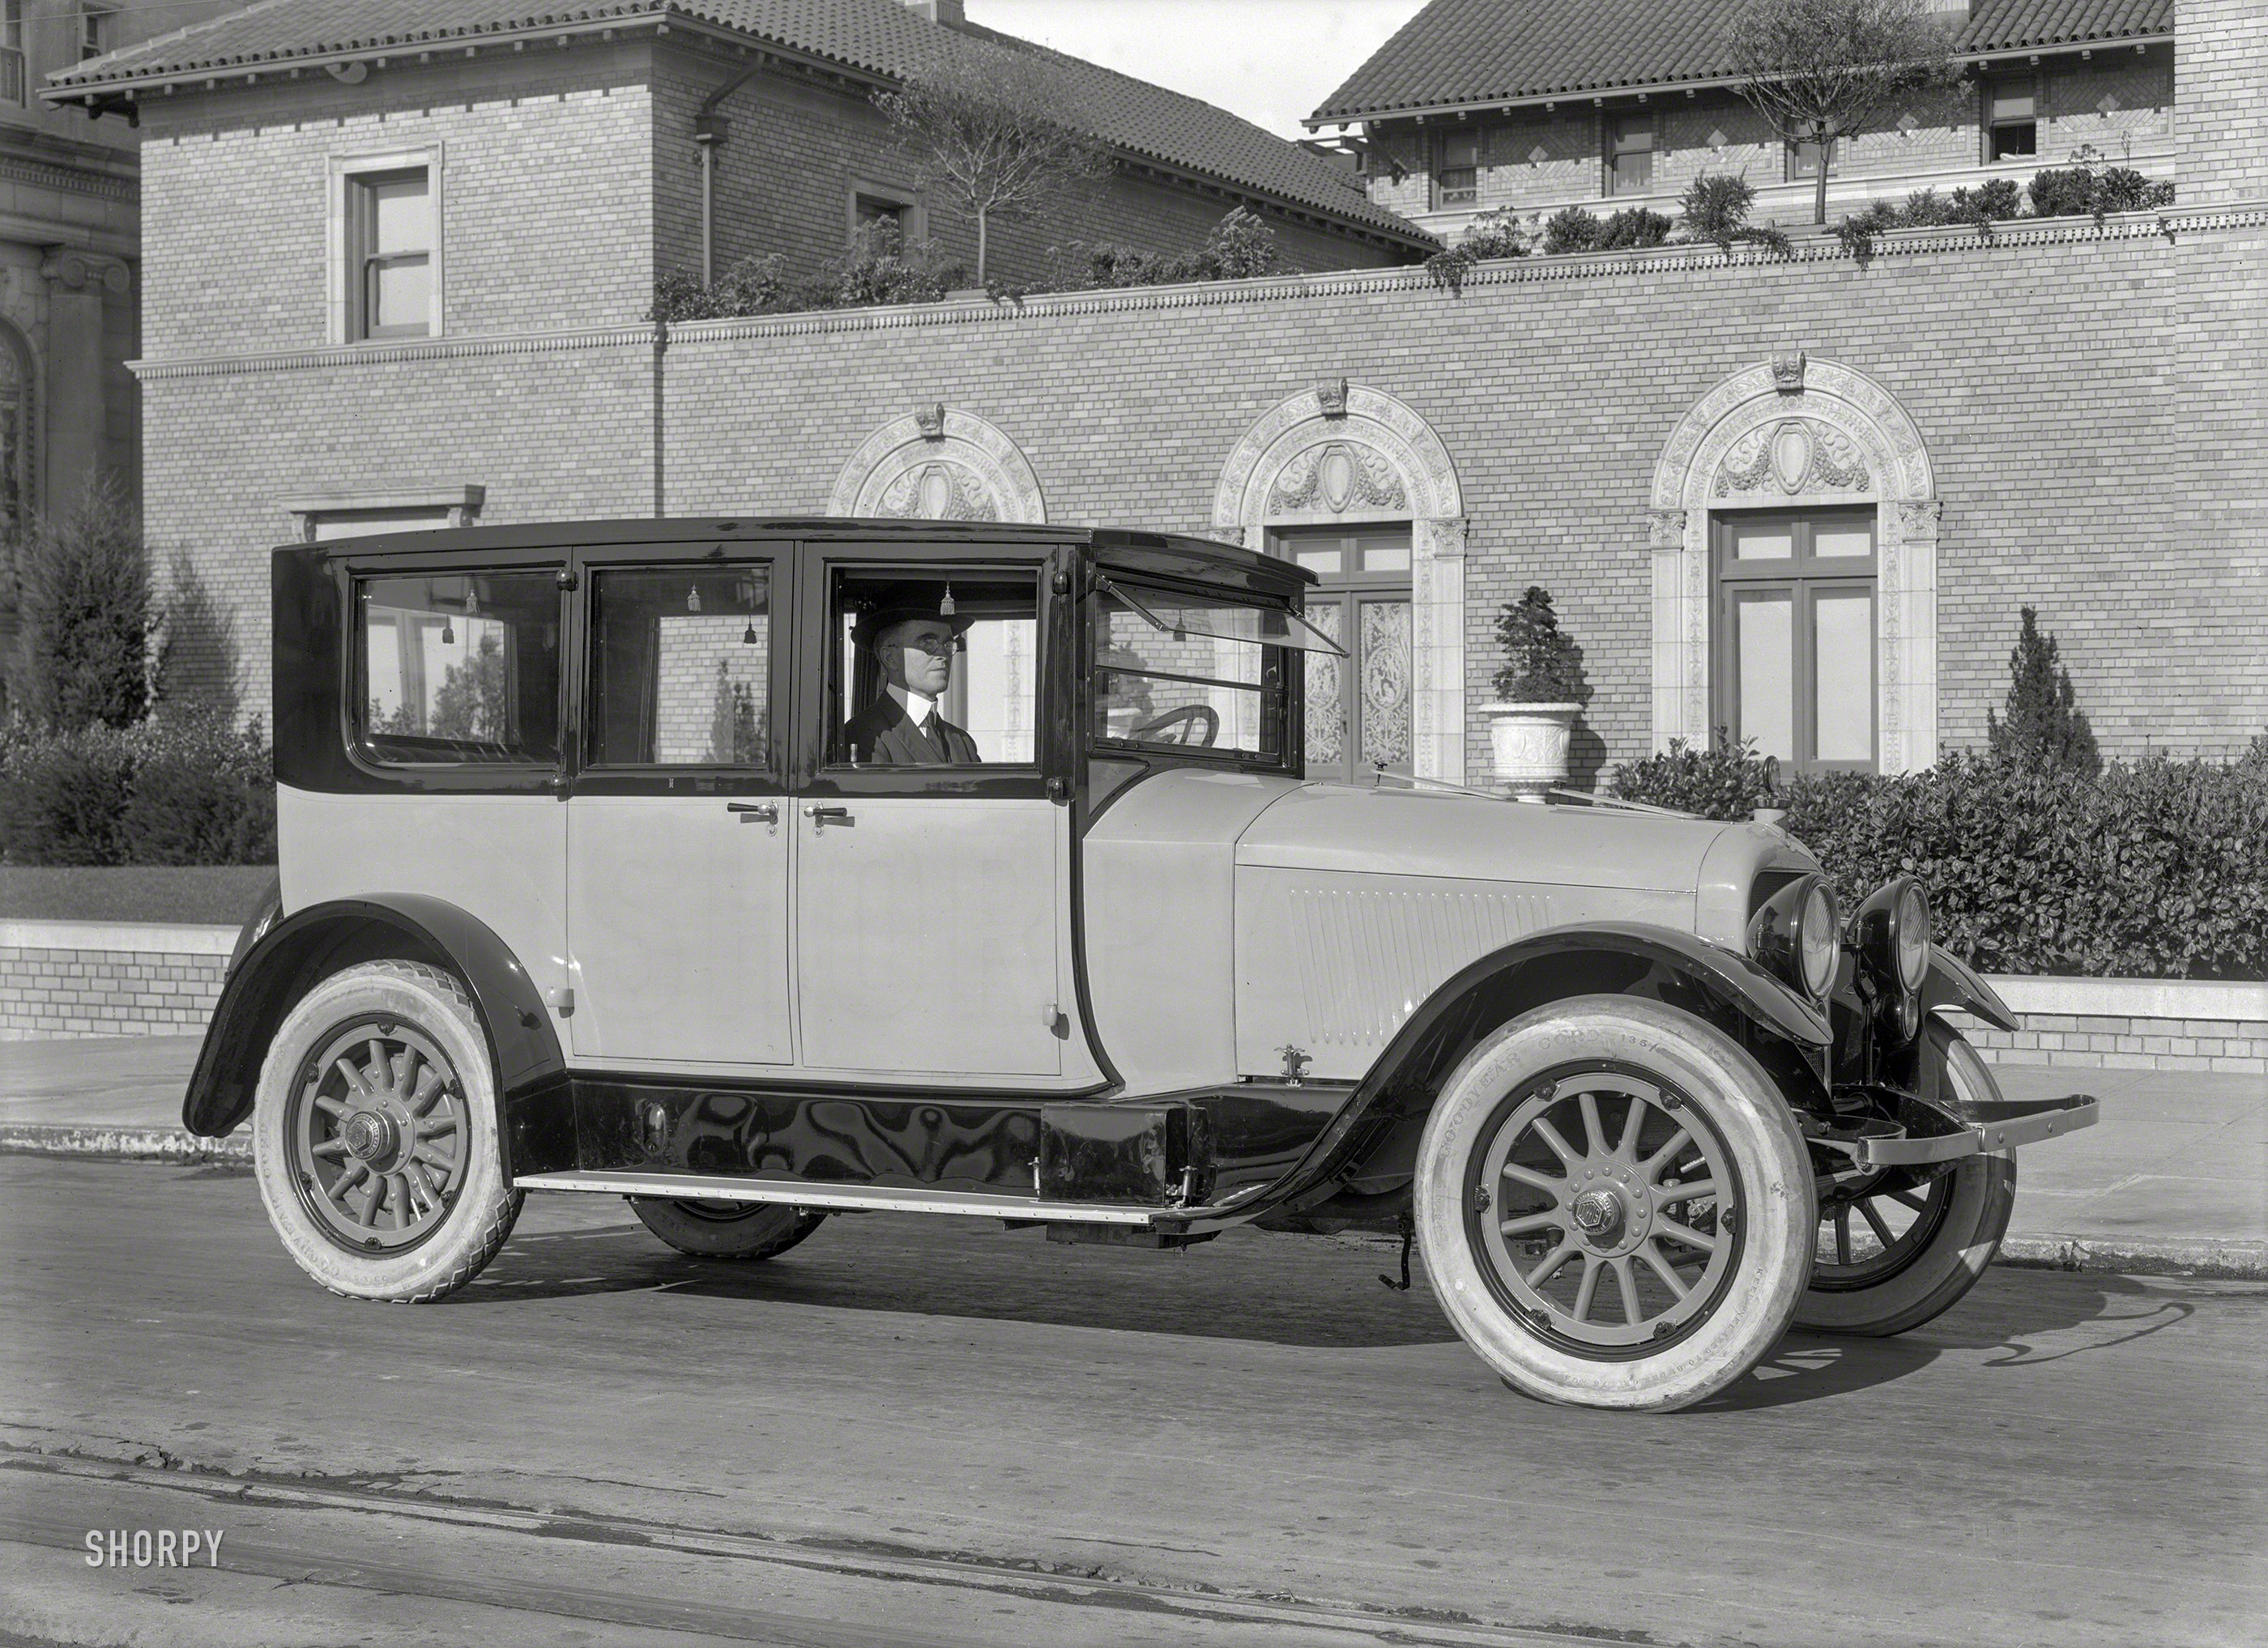 San Francisco circa 1920. "Dorris 6-80 seven-passenger sedan." Which retailed for an eye-popping $7190. Latest entry in the Shorpy Baedeker of Brobdingnagian Broughams. 5x7 glass negative by Christopher Helin. View full size.